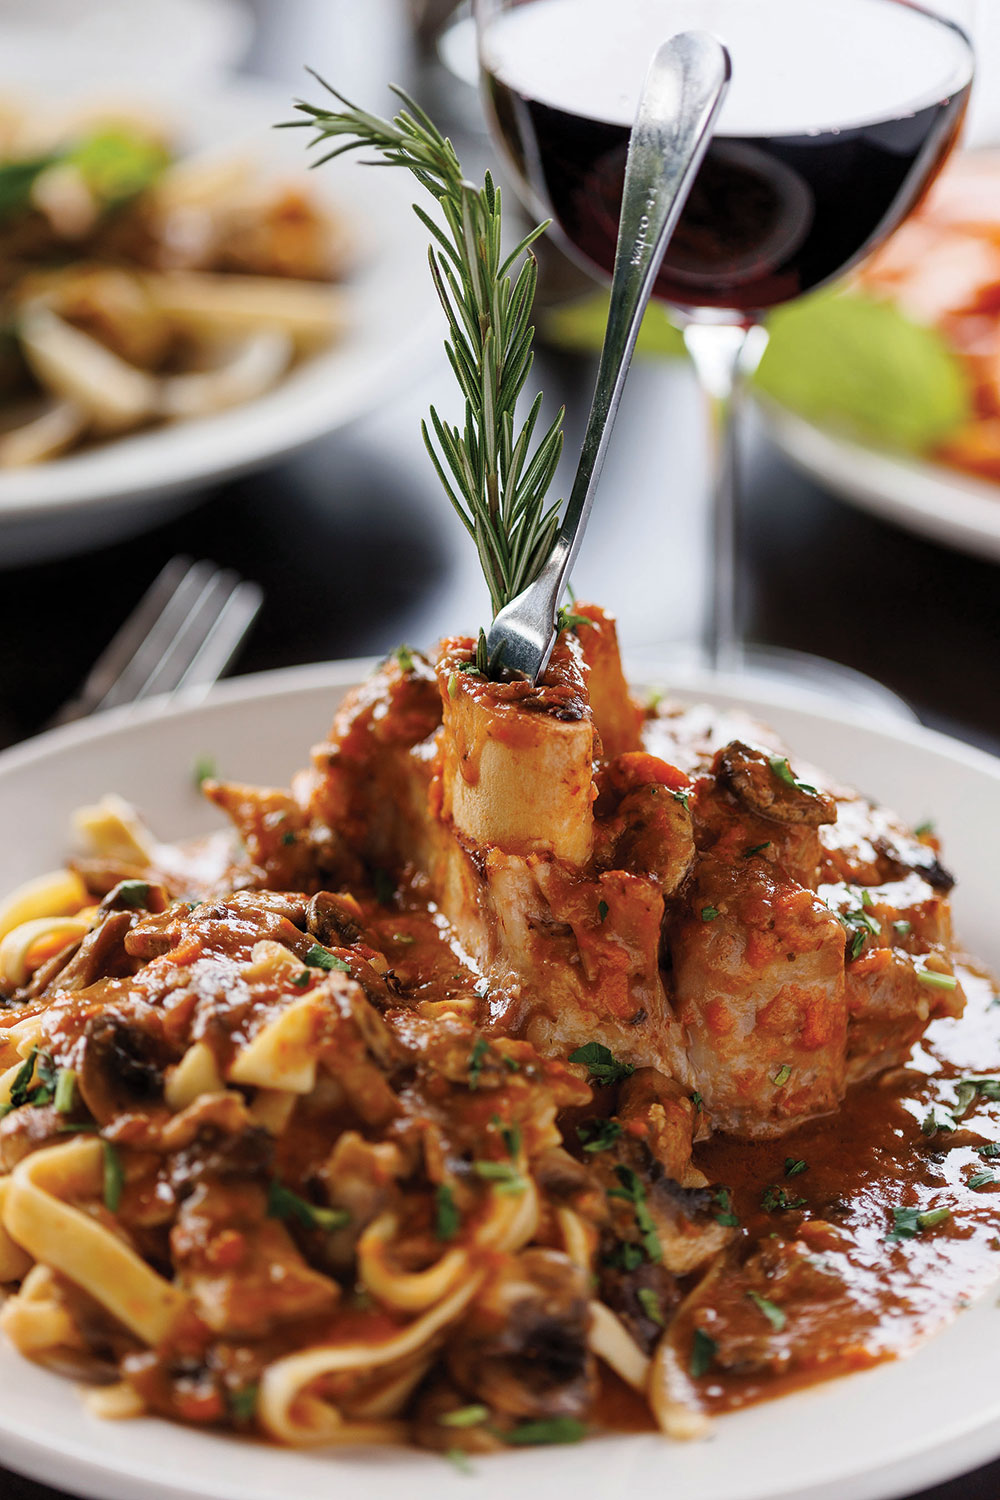 Rotating specials, such as the veal shank ossobuco, always impress.